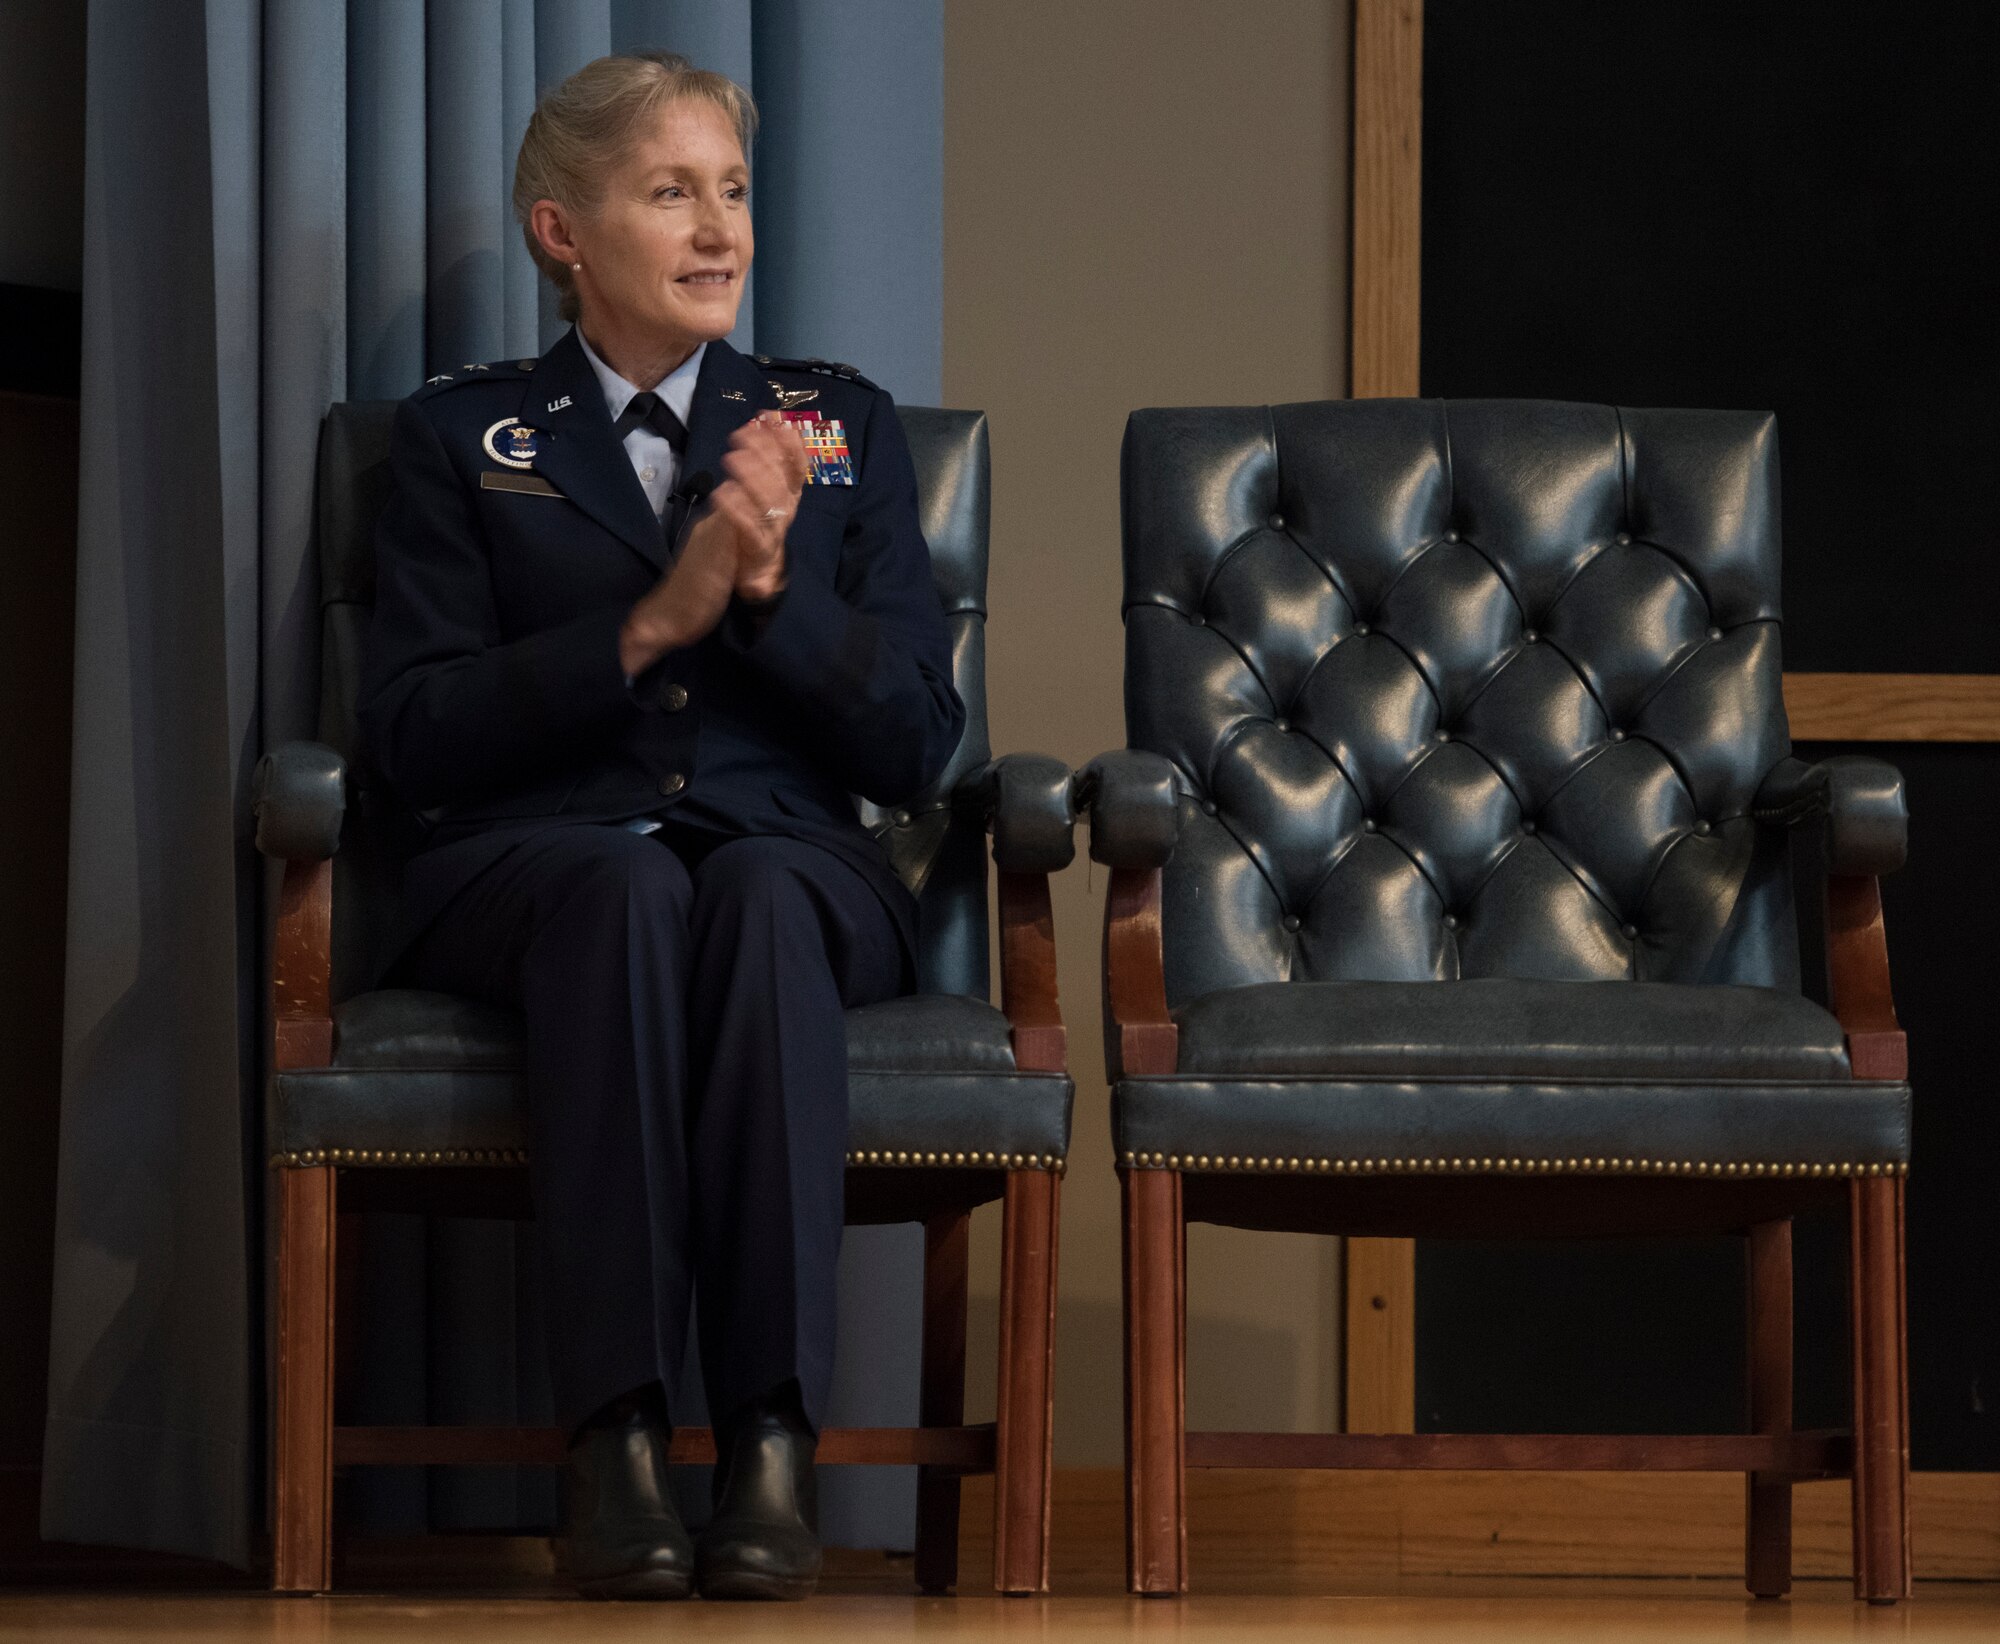 Maj. Gen. Jeannie Leavitt, Air Force Recruiting Service commander, gives a round of applause during Specialized Undergraduate Pilot Training class 19-25’s graduation ceremony at Laughlin Air Force Base, Texas, Spet. 27, 2019. Leavitt, a Laughlin SUPT graduate herself, sports a career of firsts: she was the U.S. Air Force’s first female fighter pilot, first female graduate and instructor of the USAF Weapons School, the first female fighter wing commander, the first female wing commander at Nellis Air Force Base, Nevada. (U.S. Air Force photo by Staff Sgt. Benjamin N. Valmoja)